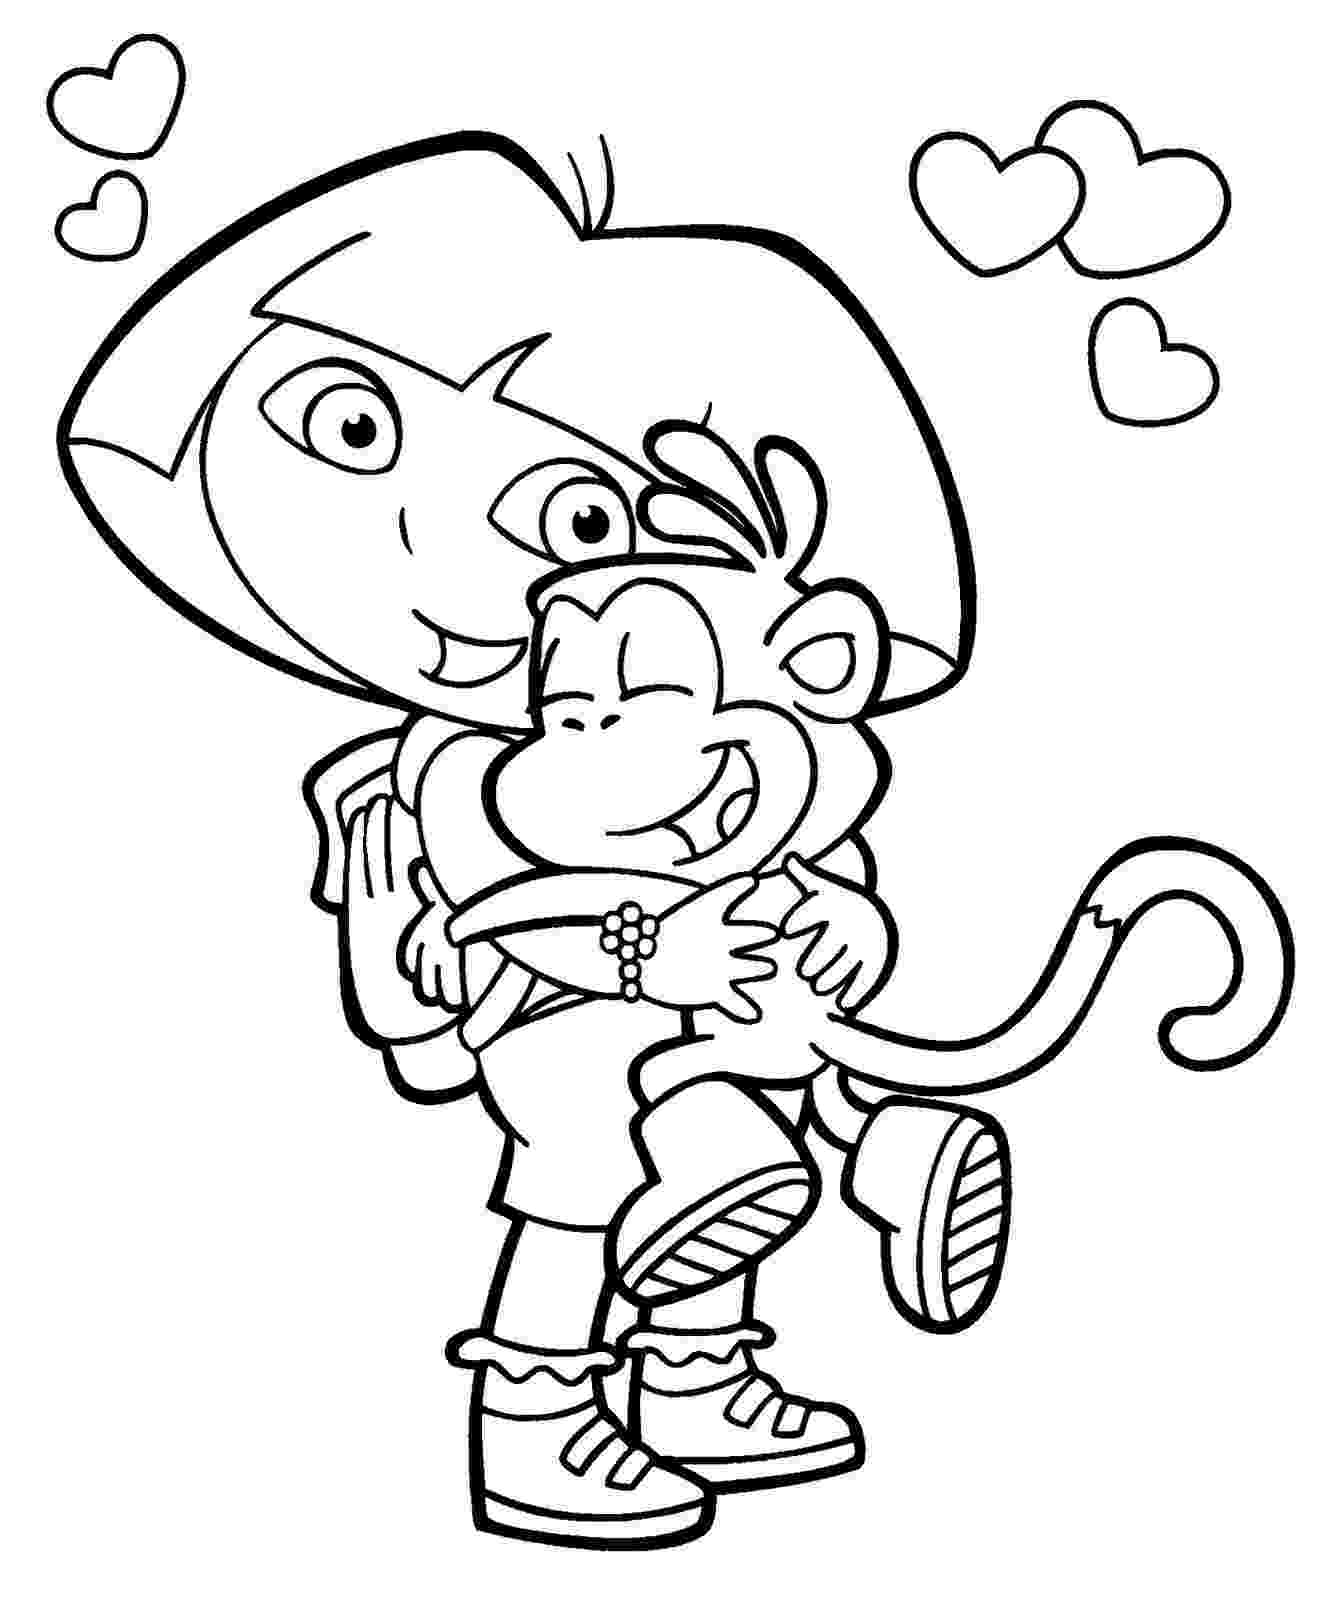 dora colouring page dora and boots coloring pages to download and print for free dora colouring page 